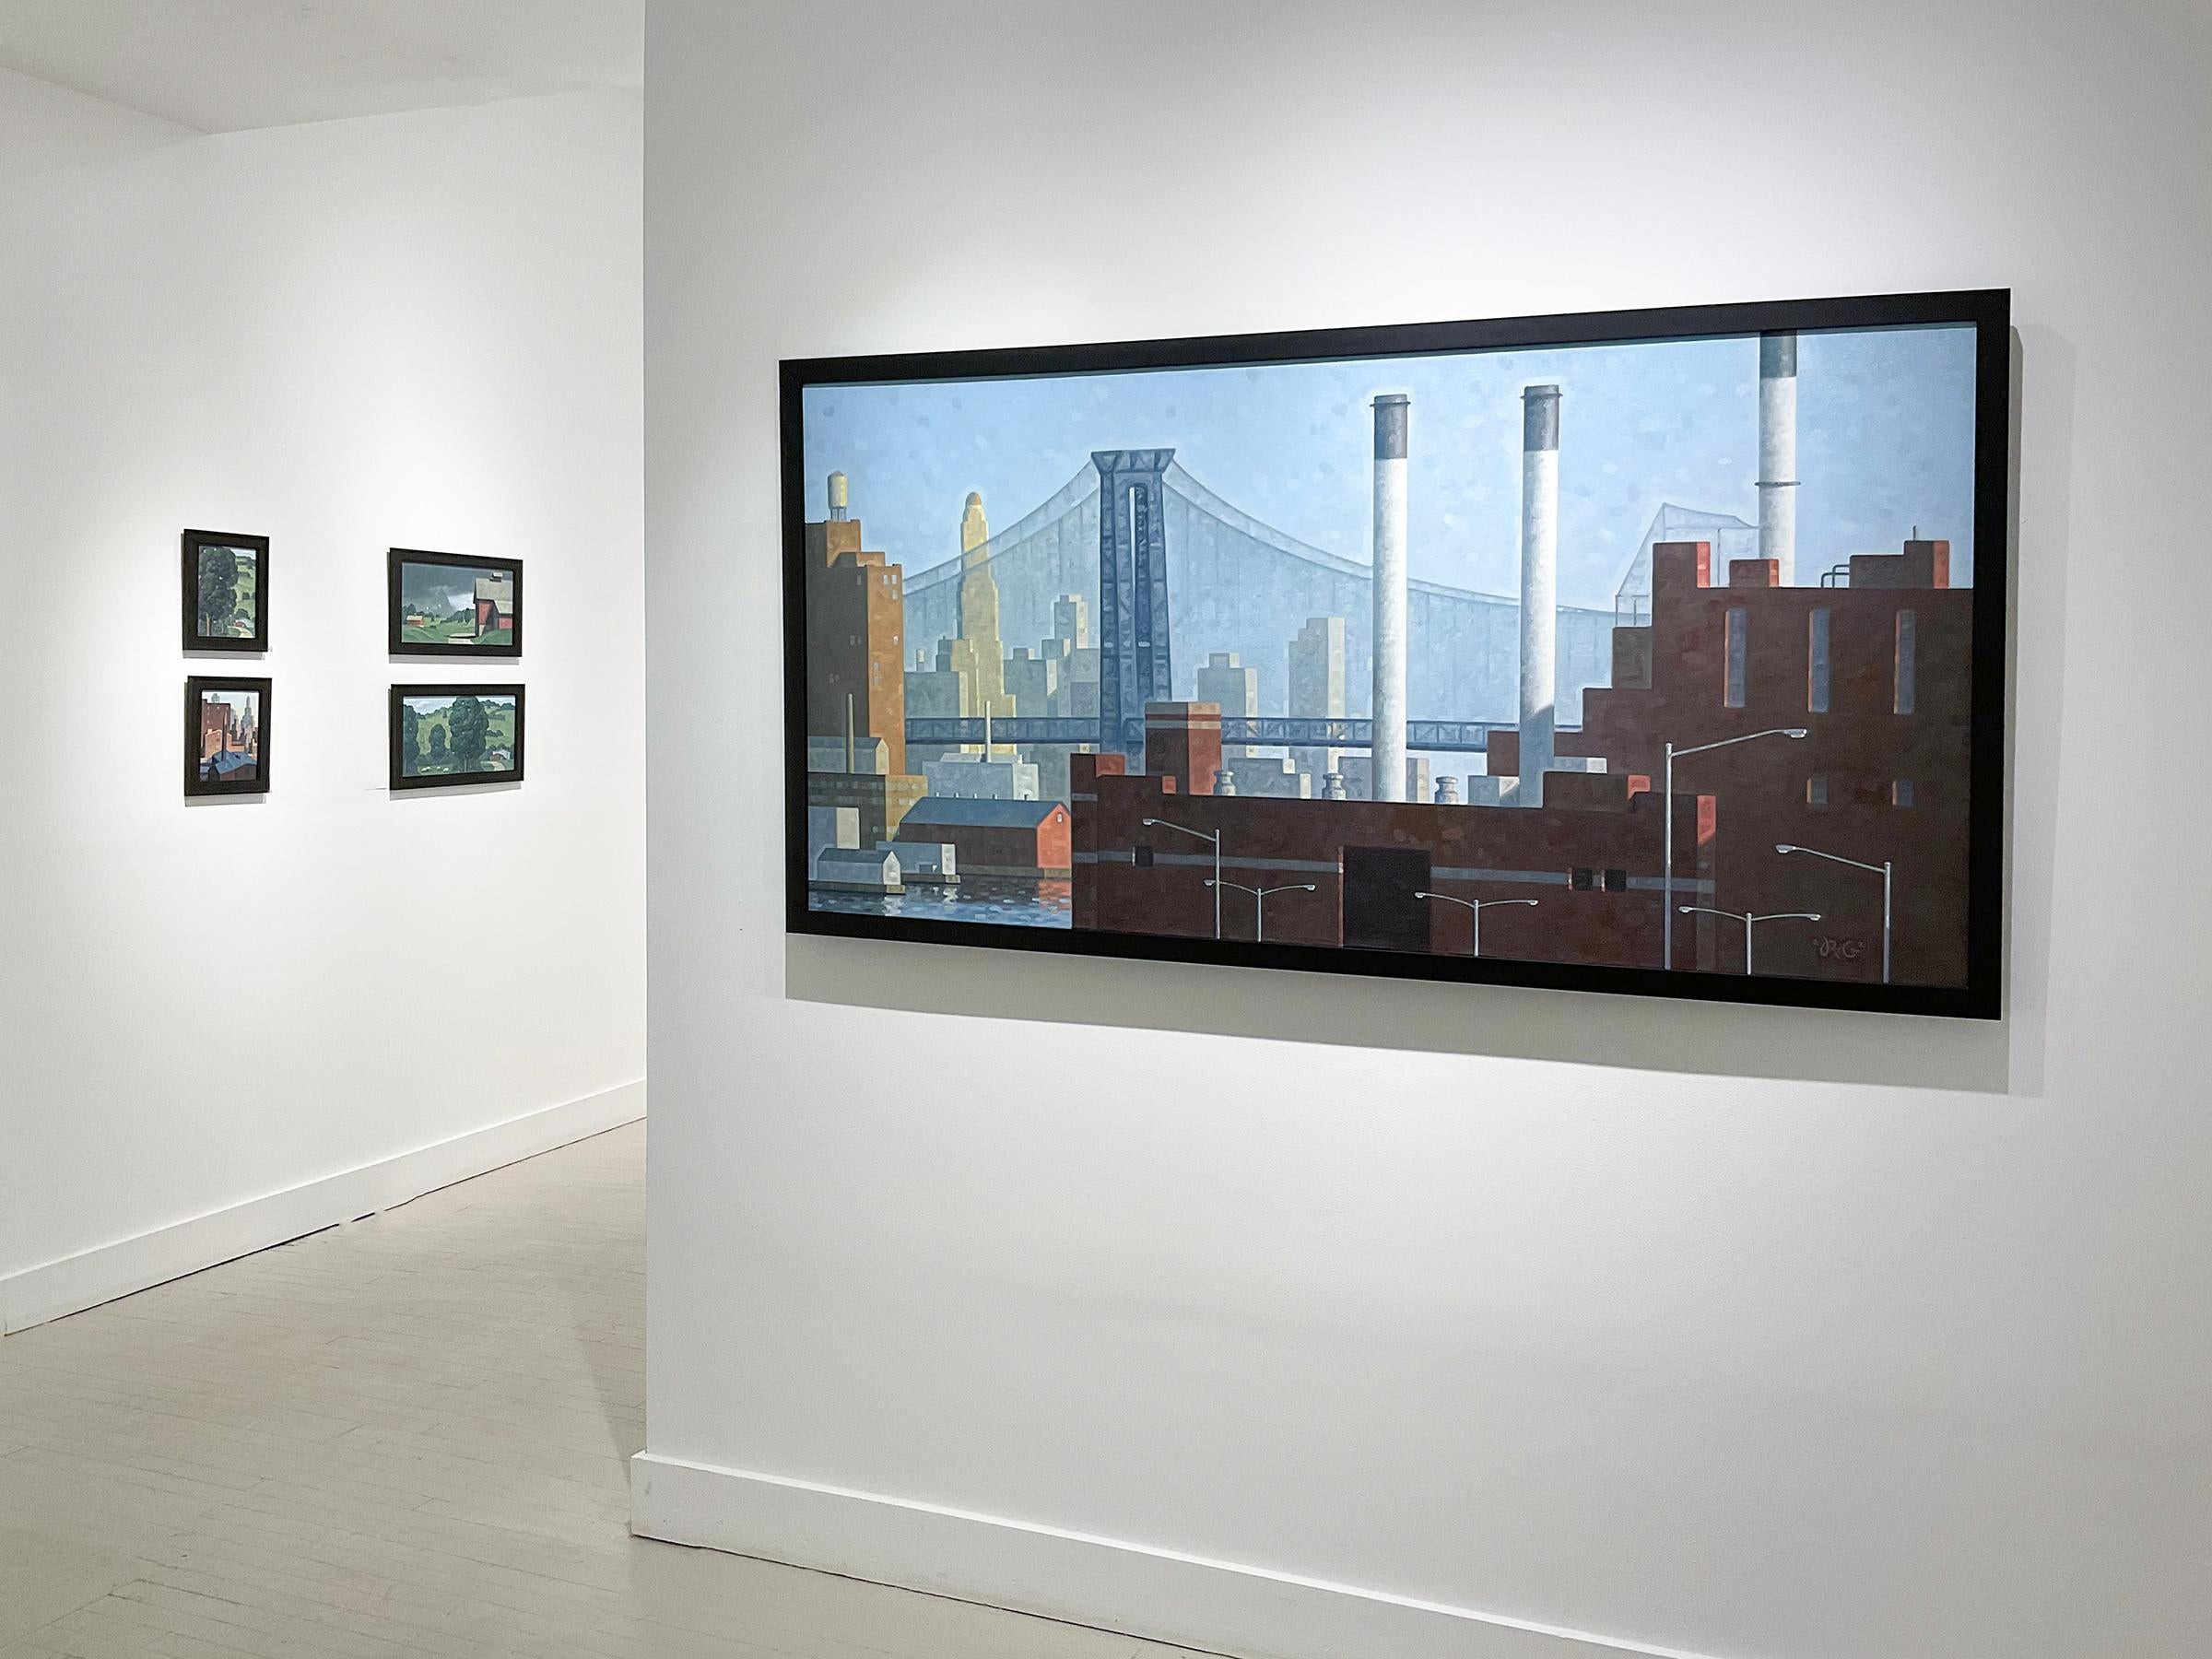 East River, Con Ed, Panorama
Savings Bank Tower Skyline in Brooklyn, NY Cultural District, Williamsburg Bridge
Painted by Robert Goldstrom in 2022, 10 x 8 inches, 12.5 x 10.5 inches framed in 
black wood frame

Robert Goldstrom, long time Brooklyn